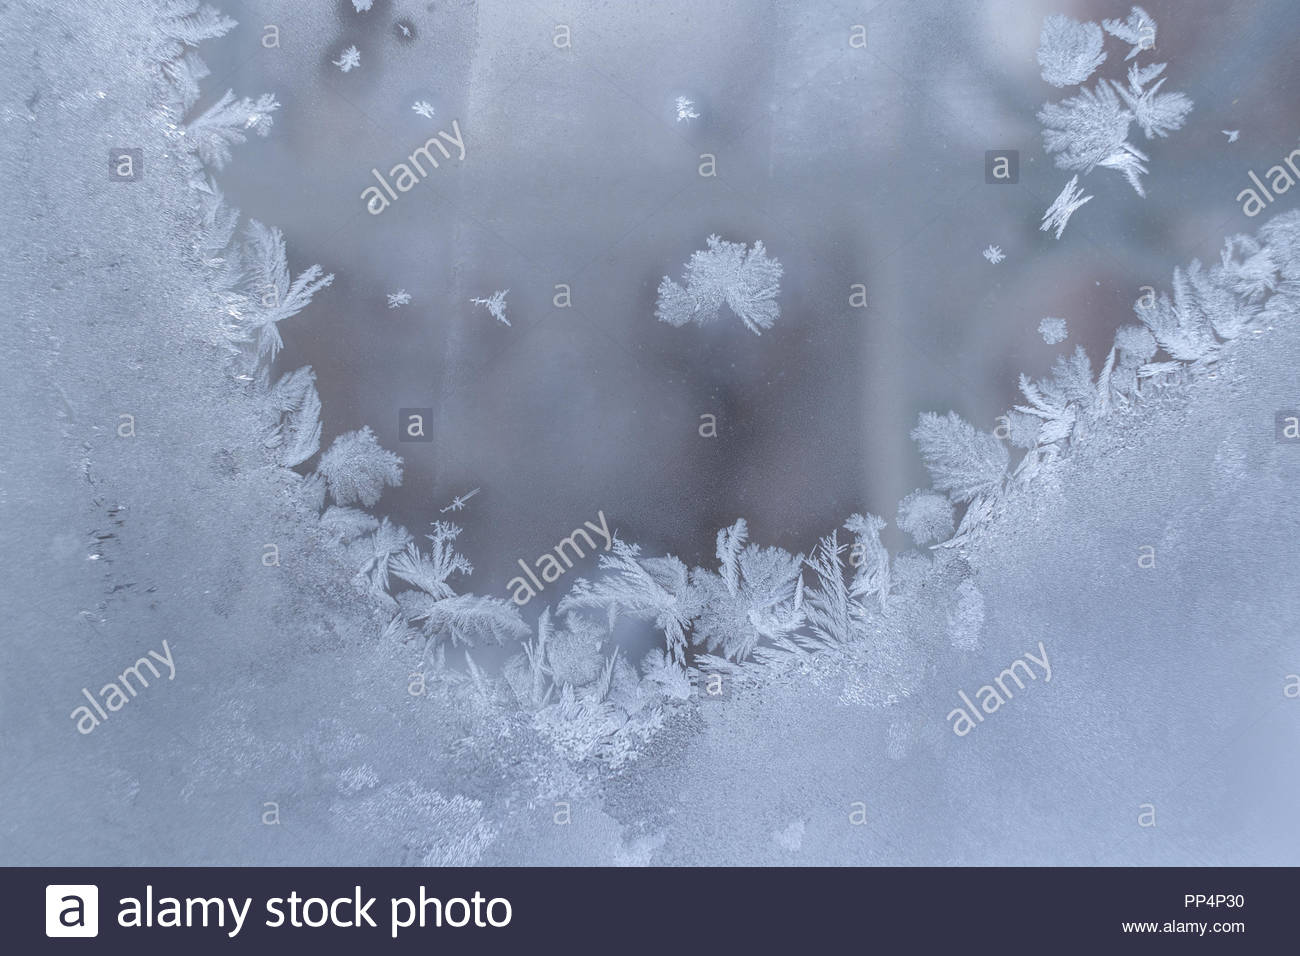 White Frozen Window With Snowflakes As Christmas Or Winter